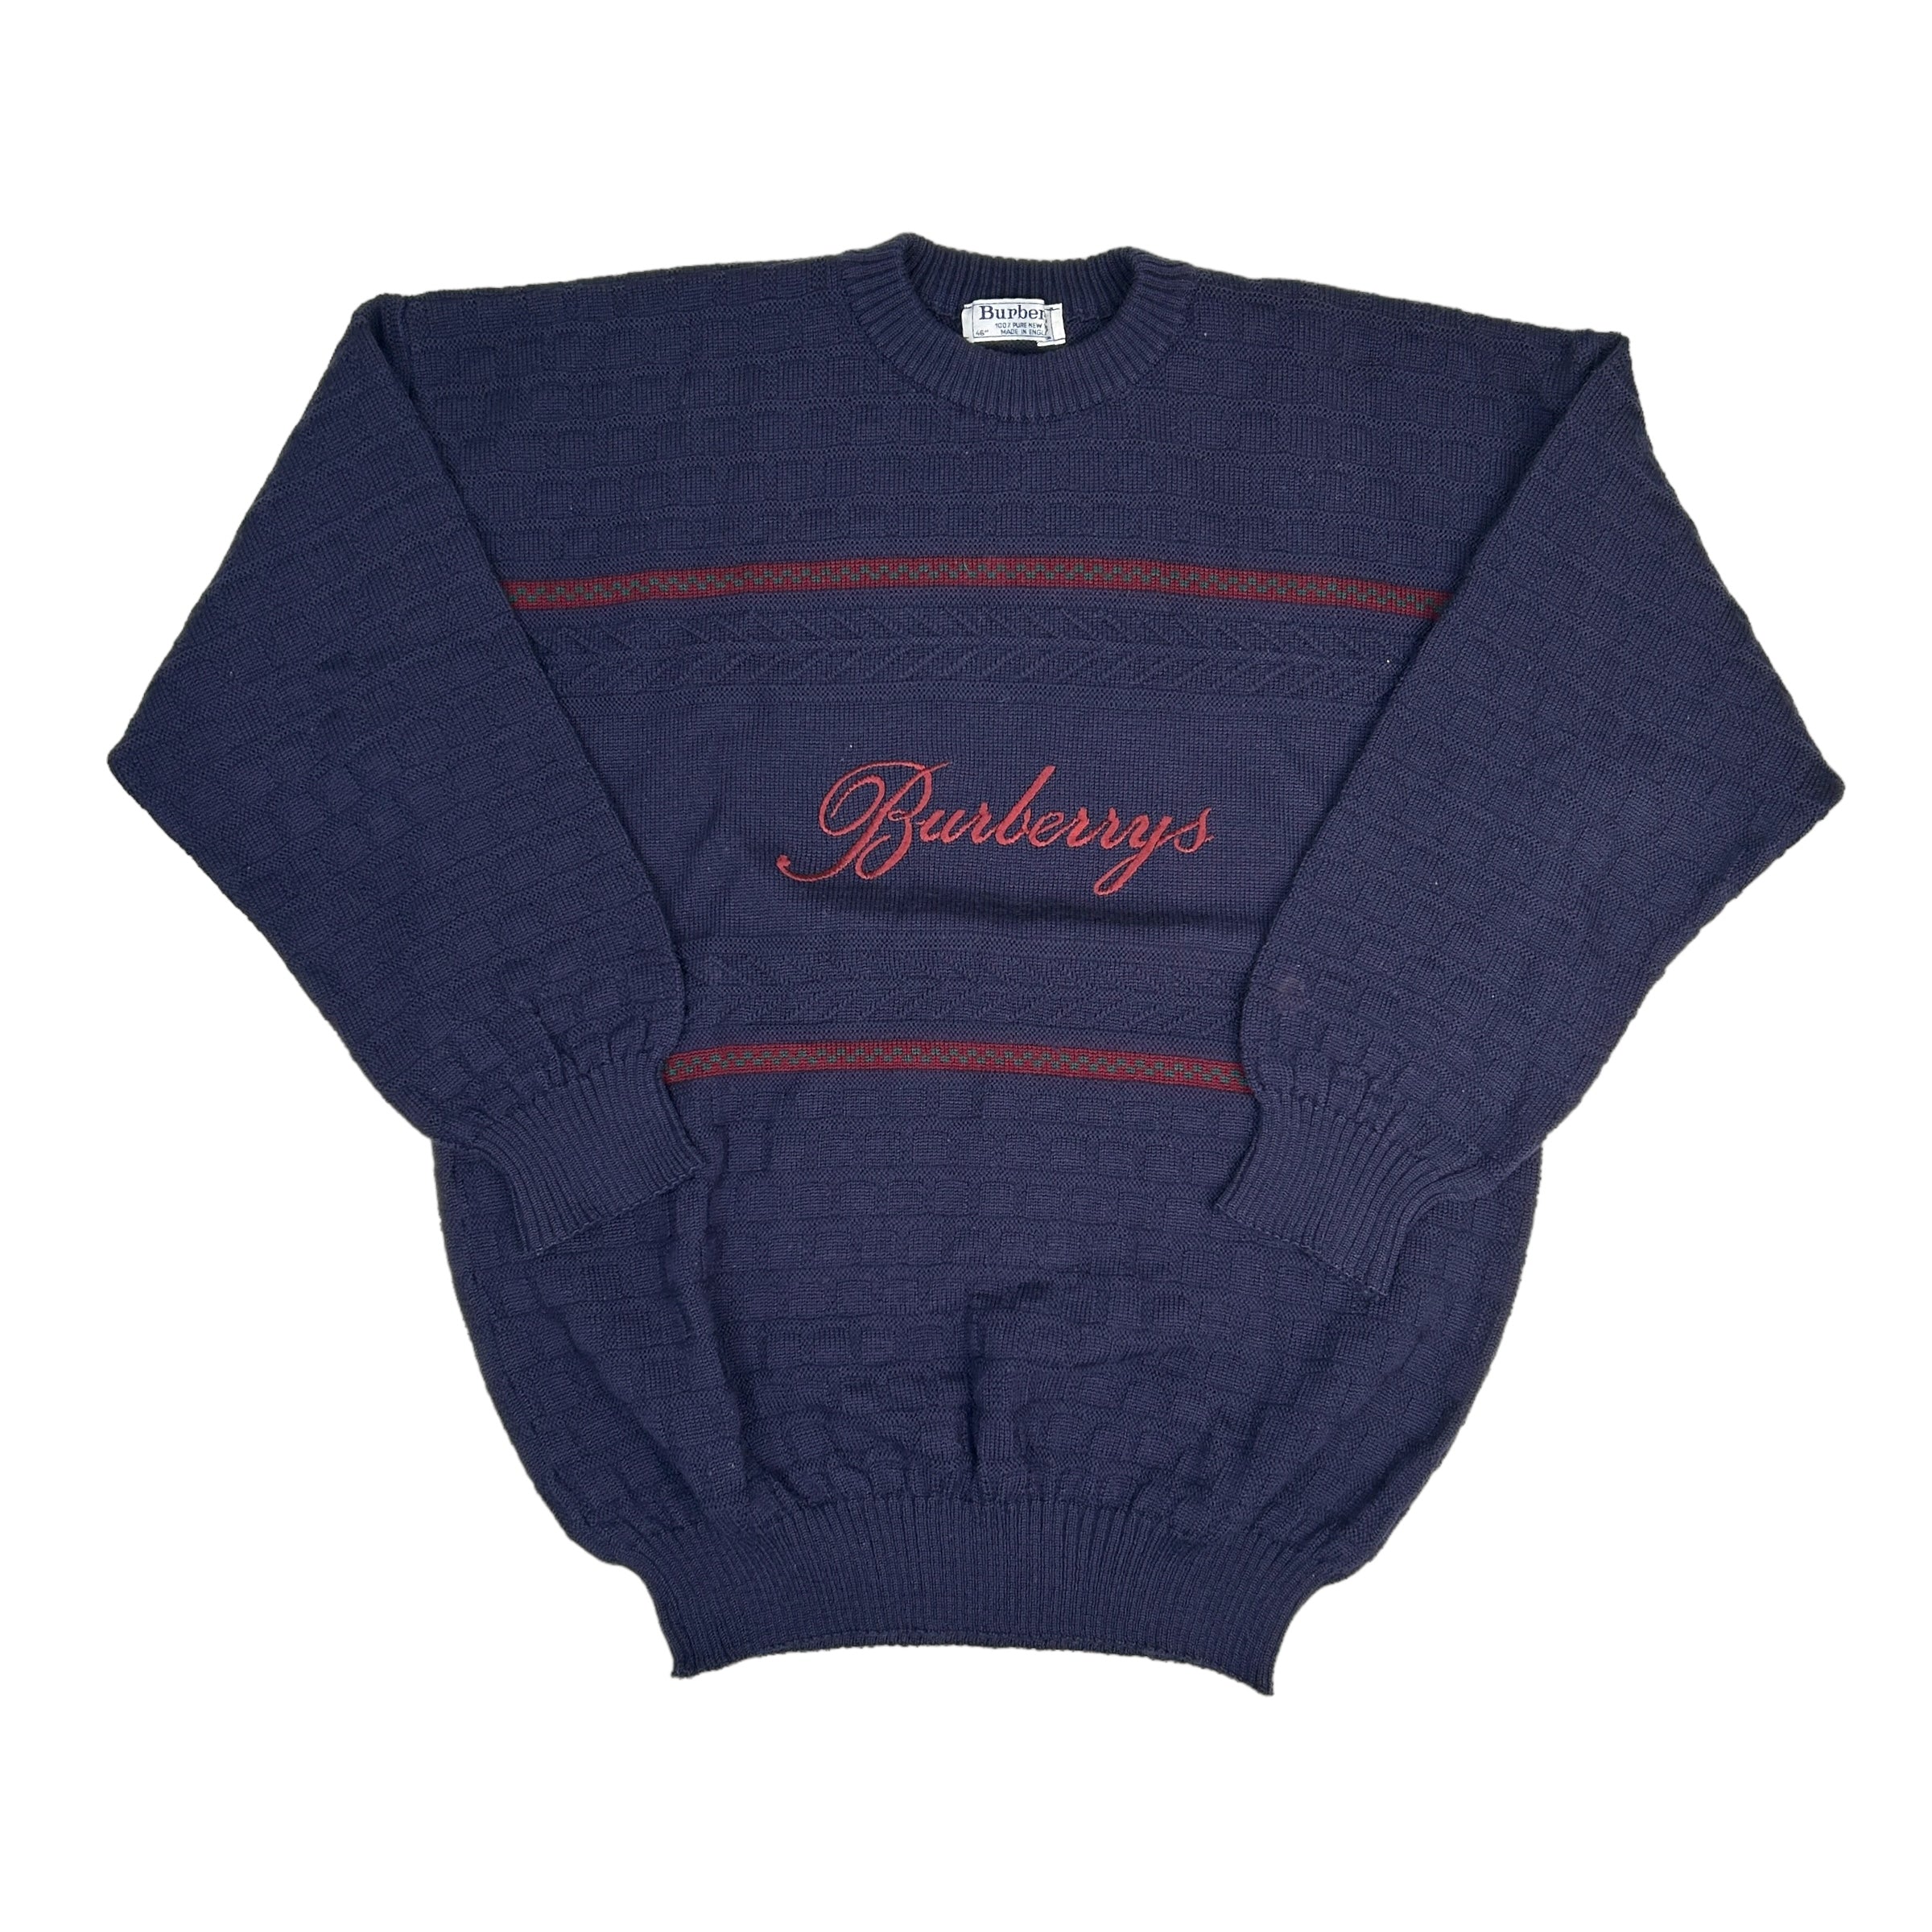 BURBERRY SCRIPT LOGO PURE WOOL KNIT SWEATER - NAVY/RED